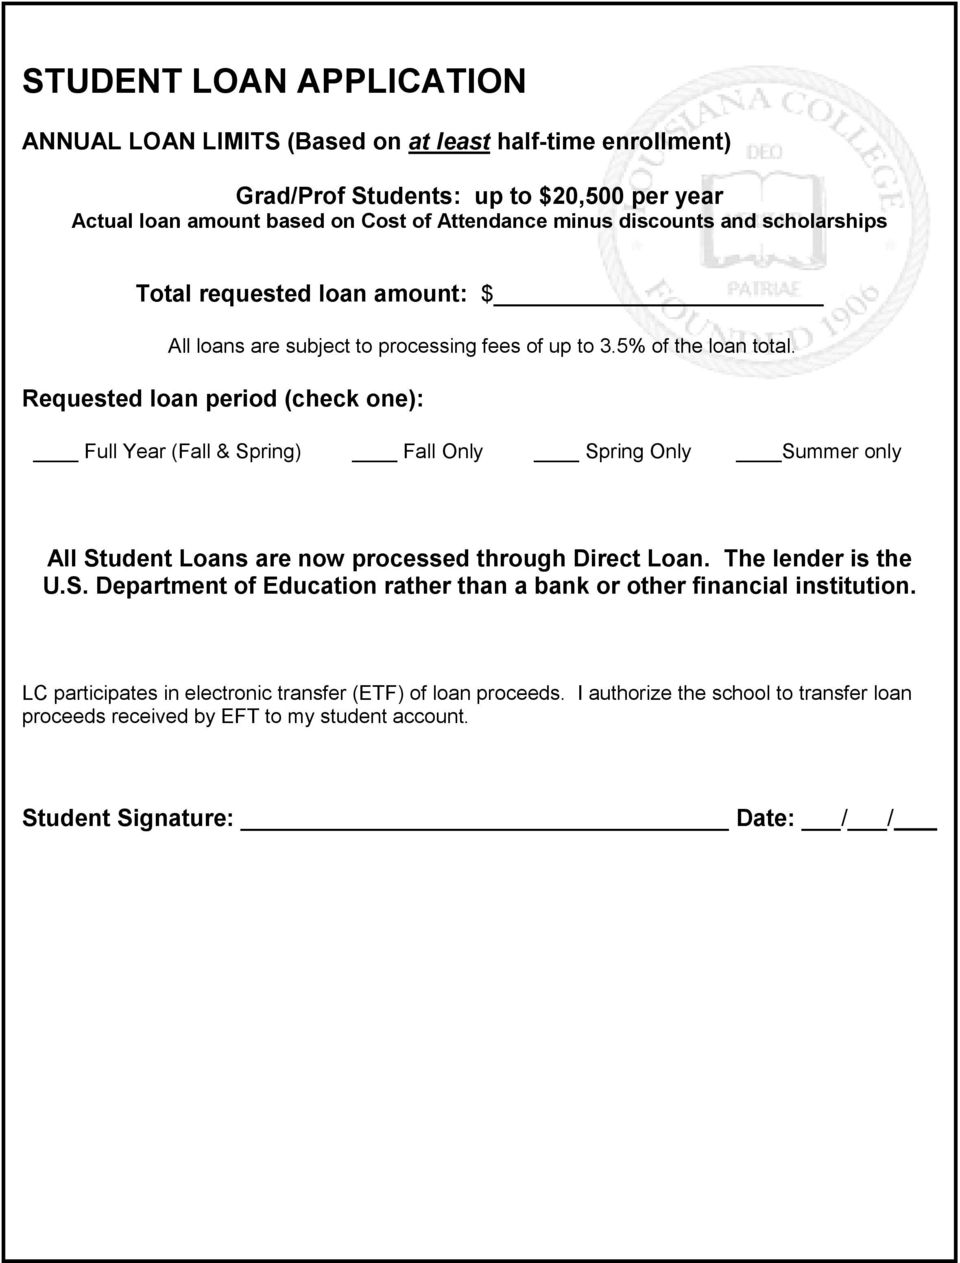 Requested loan period (check one): Full Year (Fall & Spring) Fall Only Spring Only Summer only All Student Loans are now processed through Direct Loan. The lender is the U.S. Department of Education rather than a bank or other financial institution.